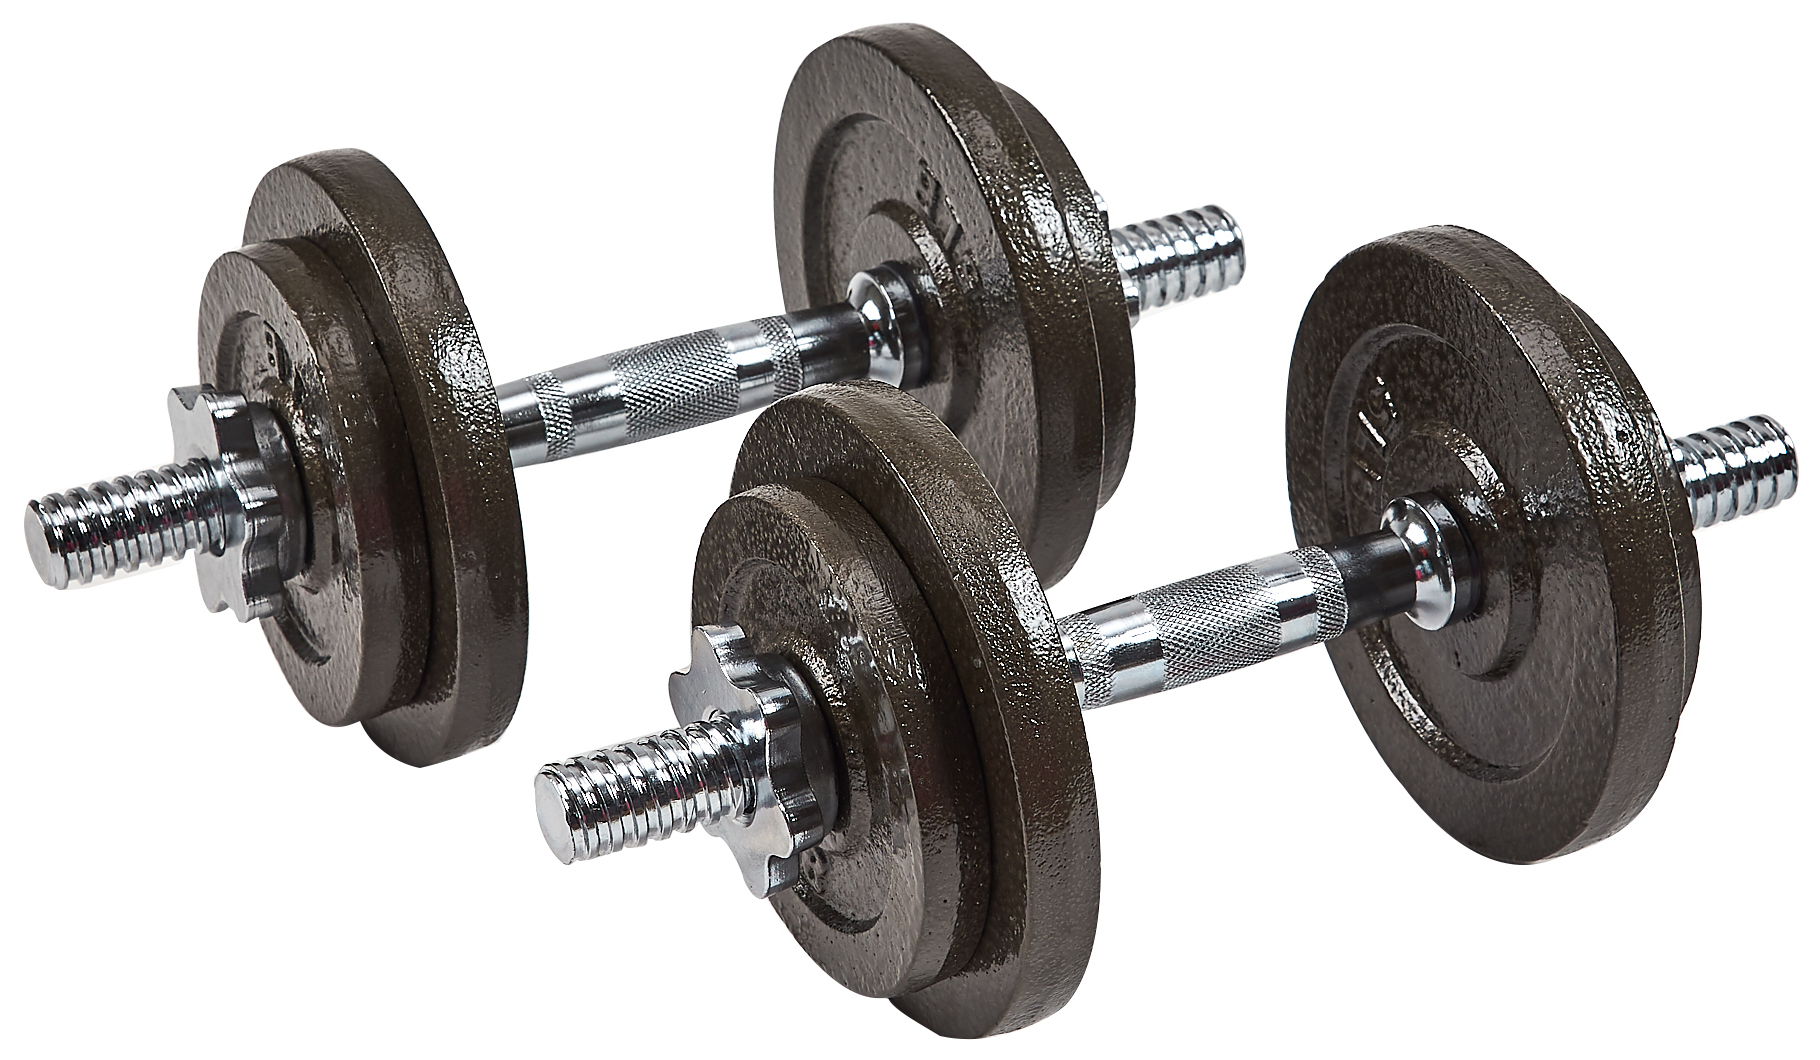 BalanceFrom Contoured Handle Cast Iron Adjustable Dumbbell Weight Set, 20lb Pair - image 1 of 2